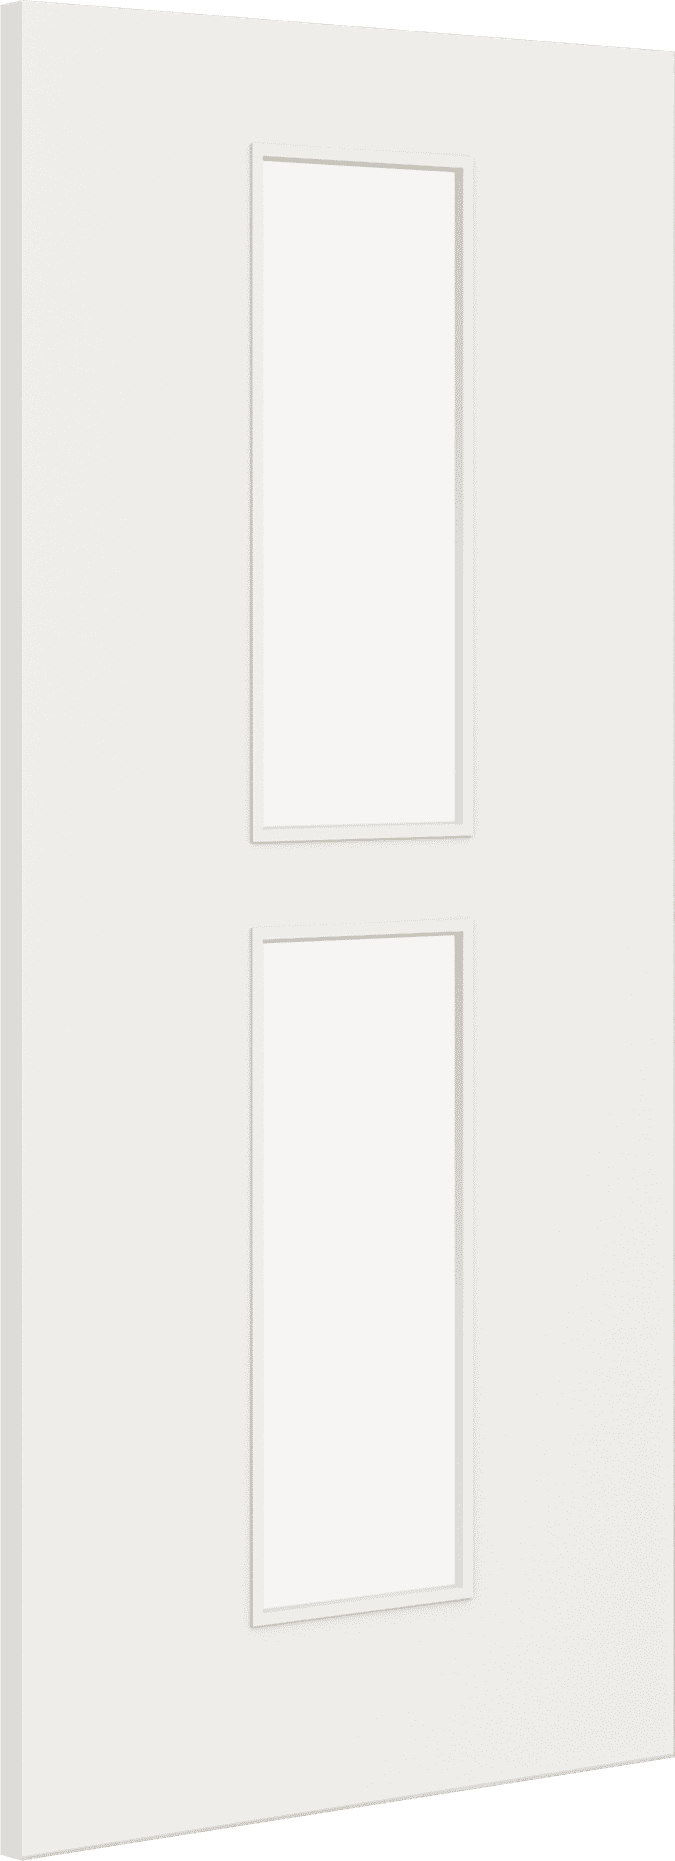 1981mm x 533mm x 44mm (21") Architectural Paint Grade White 12 Clear Glazed Fire Door Blank